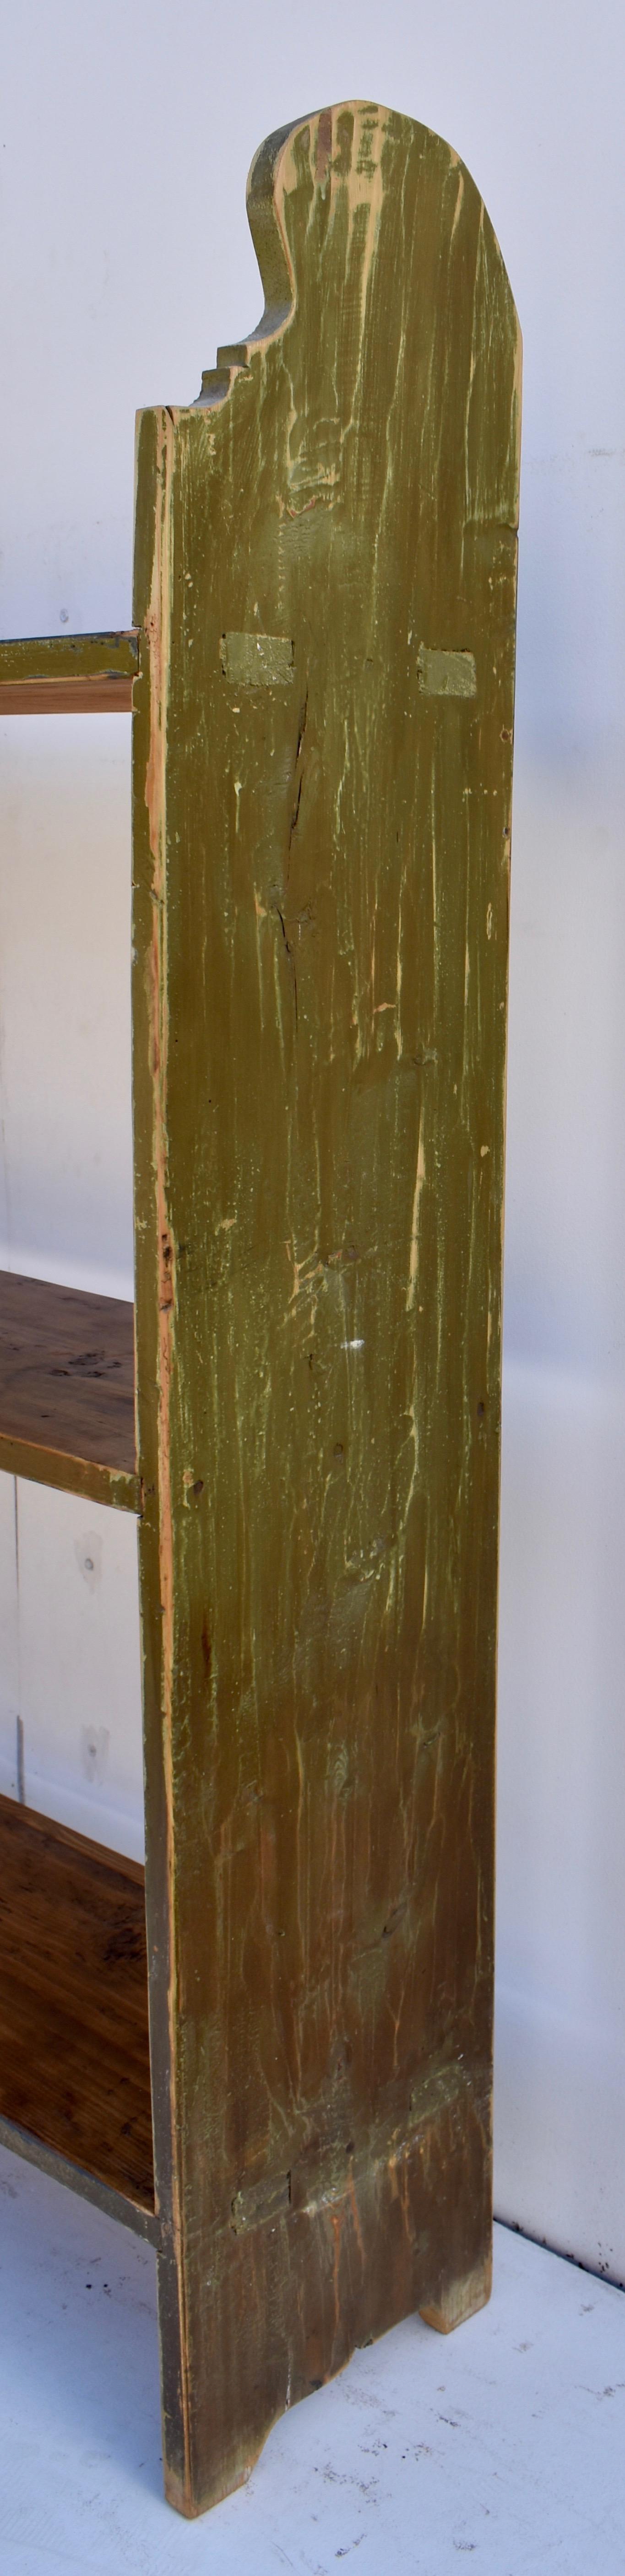 20th Century Painted Pine Bucket Bench or Utility Shelves For Sale